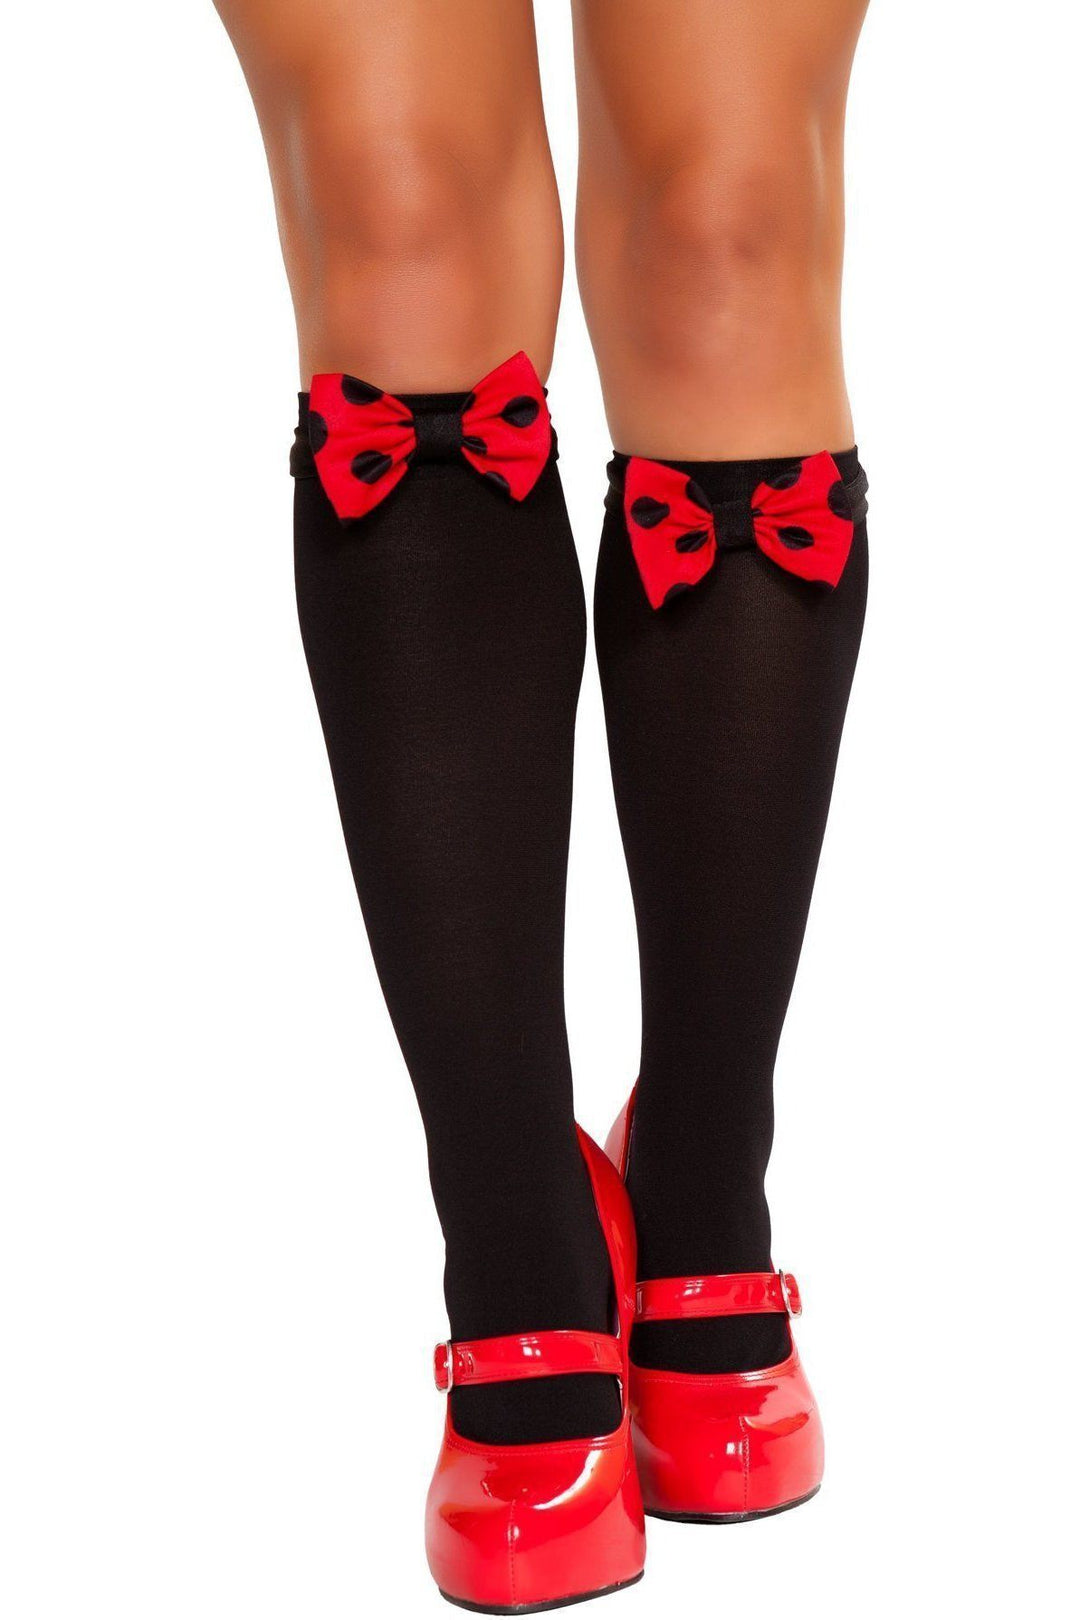 Roma Mouse Bows for Stockings-SEXYSHOES.COM